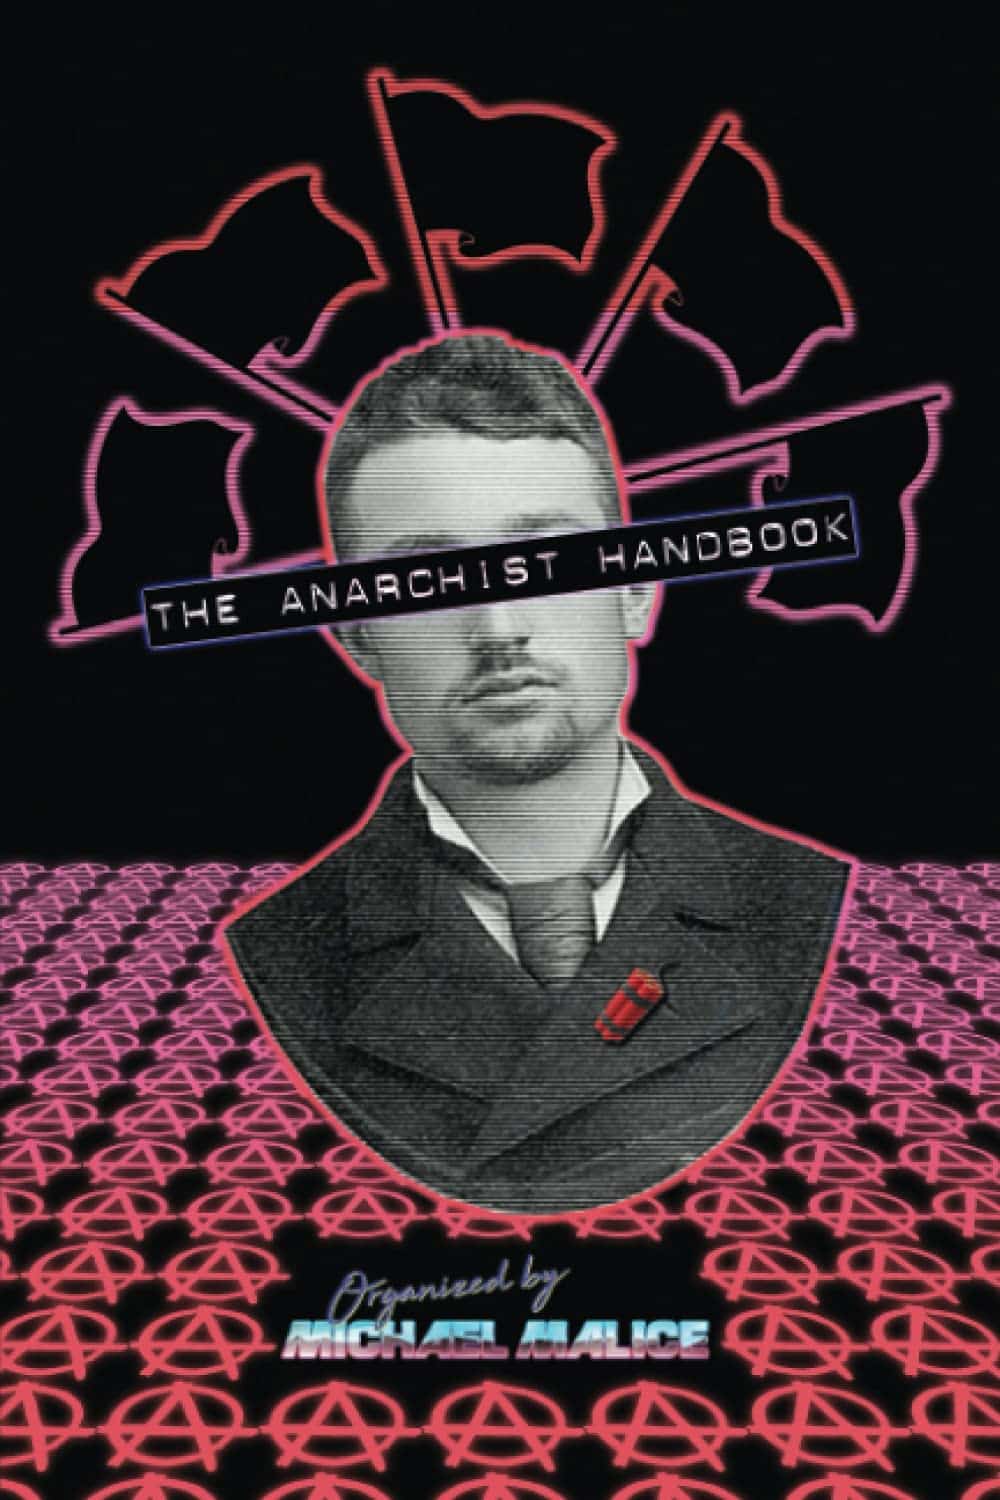 Episode 588: Examining ‘The Anarchist Handbook’ w/ Keith Knight and Sal the Agorist